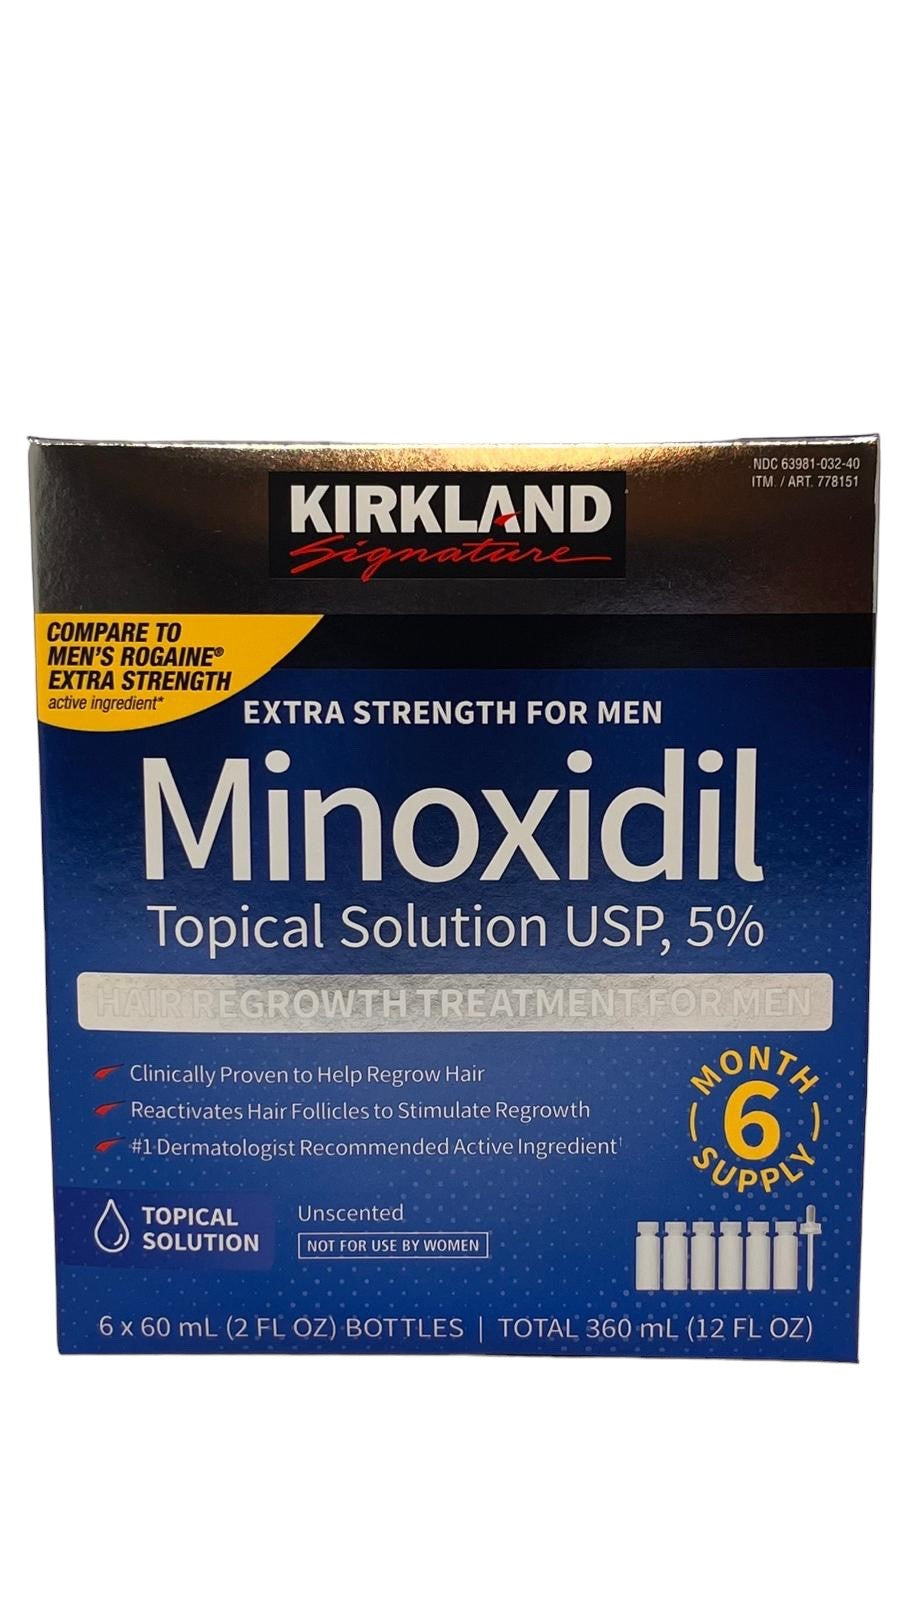 Kirkland Minoxidil 5% Solution Hair Loss Regrowth Treatment - 2 PACK for 12 Months